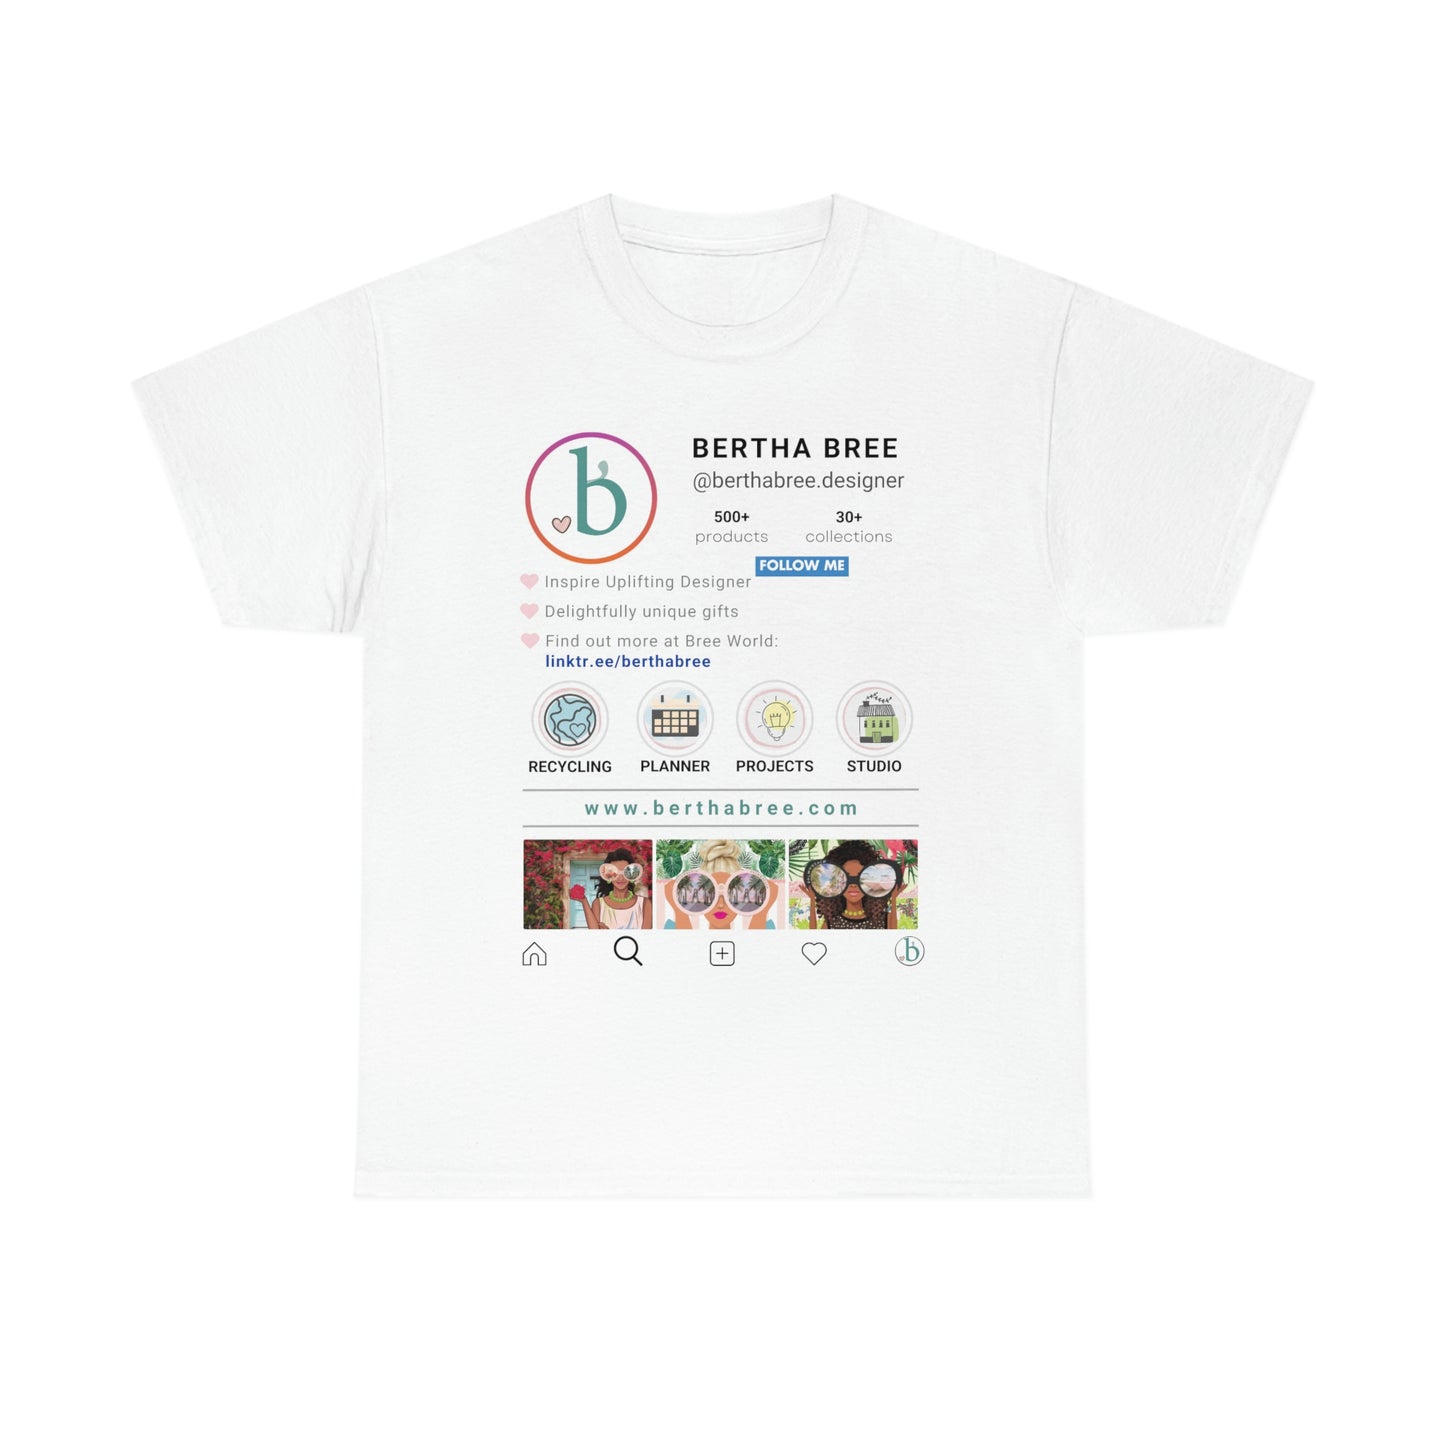 INSTAGRAM PERSONALIZED T-SHIRT